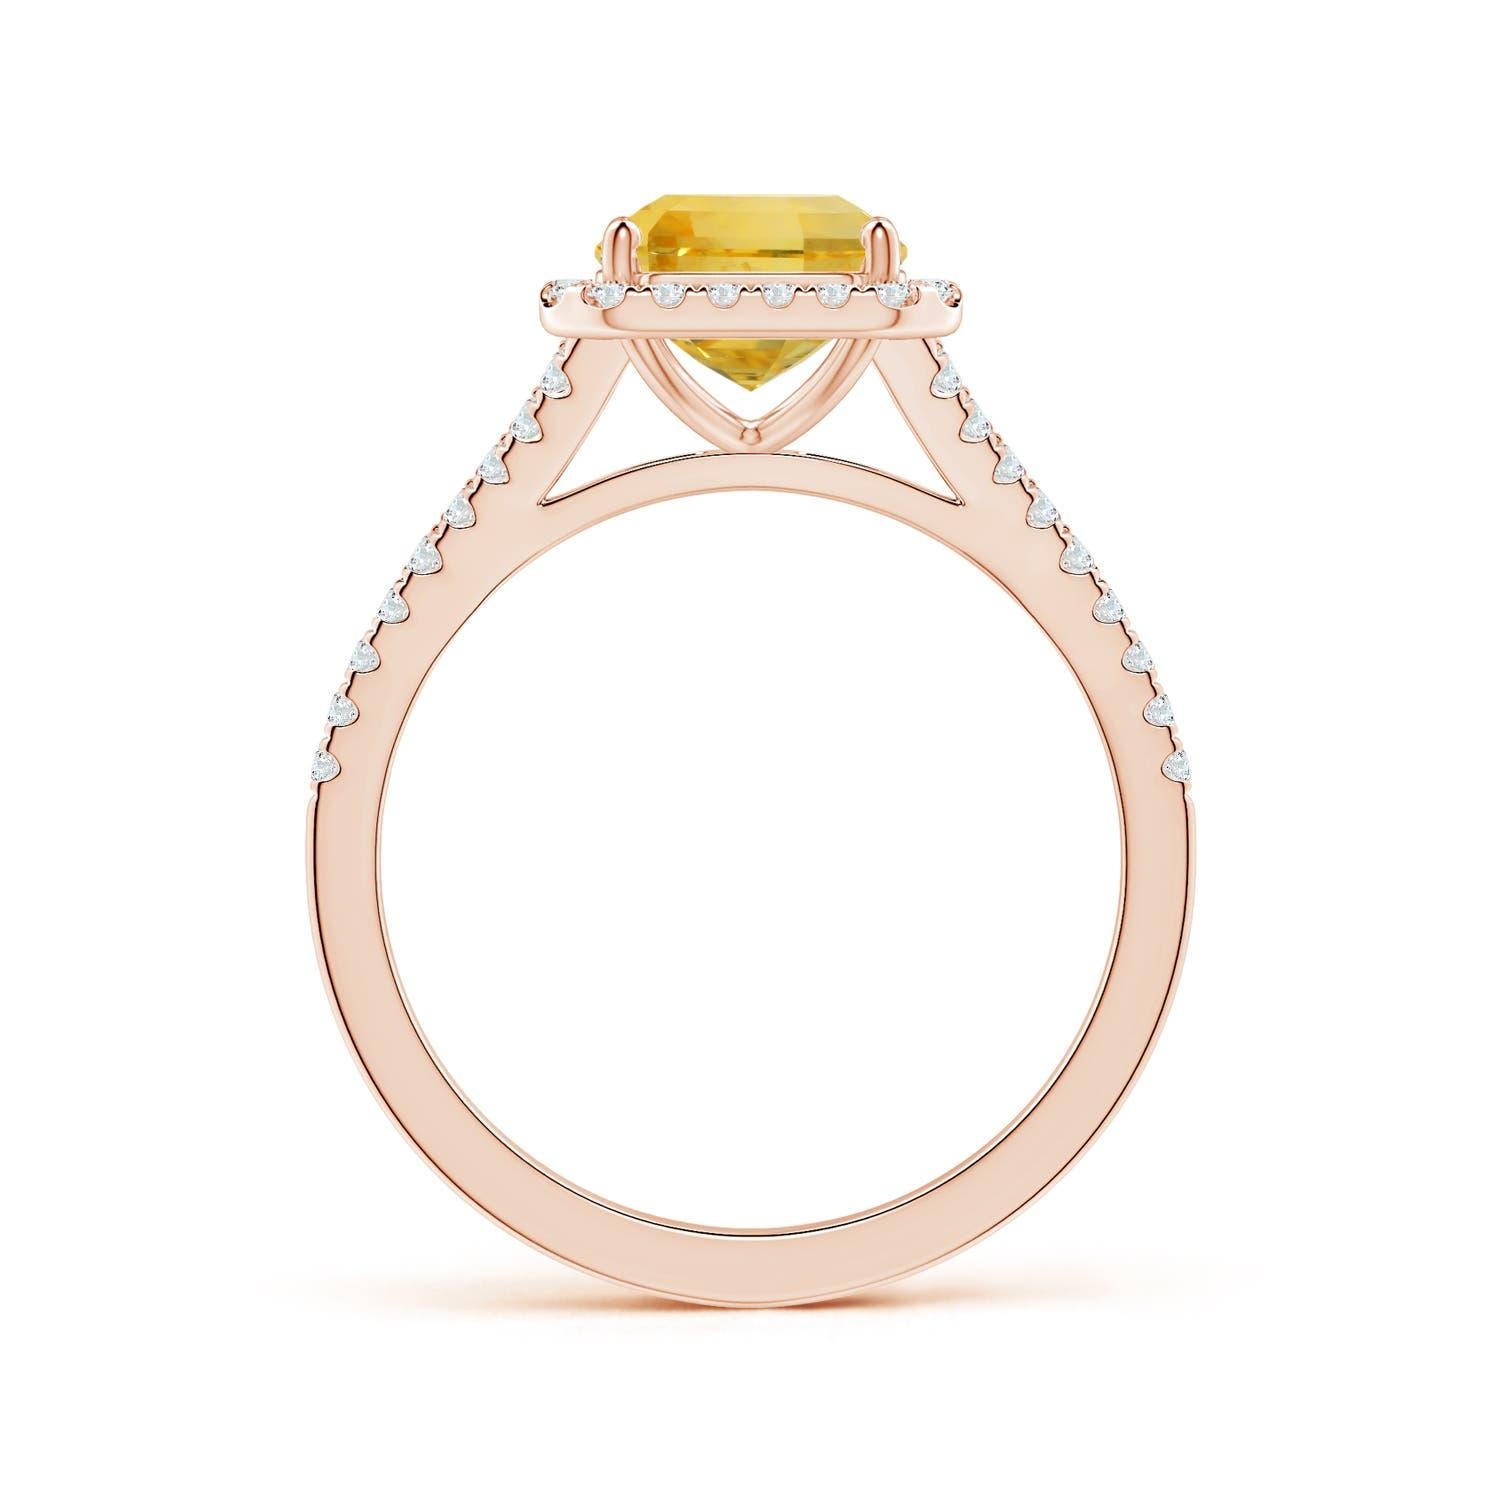 For Sale:  Angara Gia Certified Natural Emerald-Cut Yellow Sapphire Rose Gold Halo Ring 2